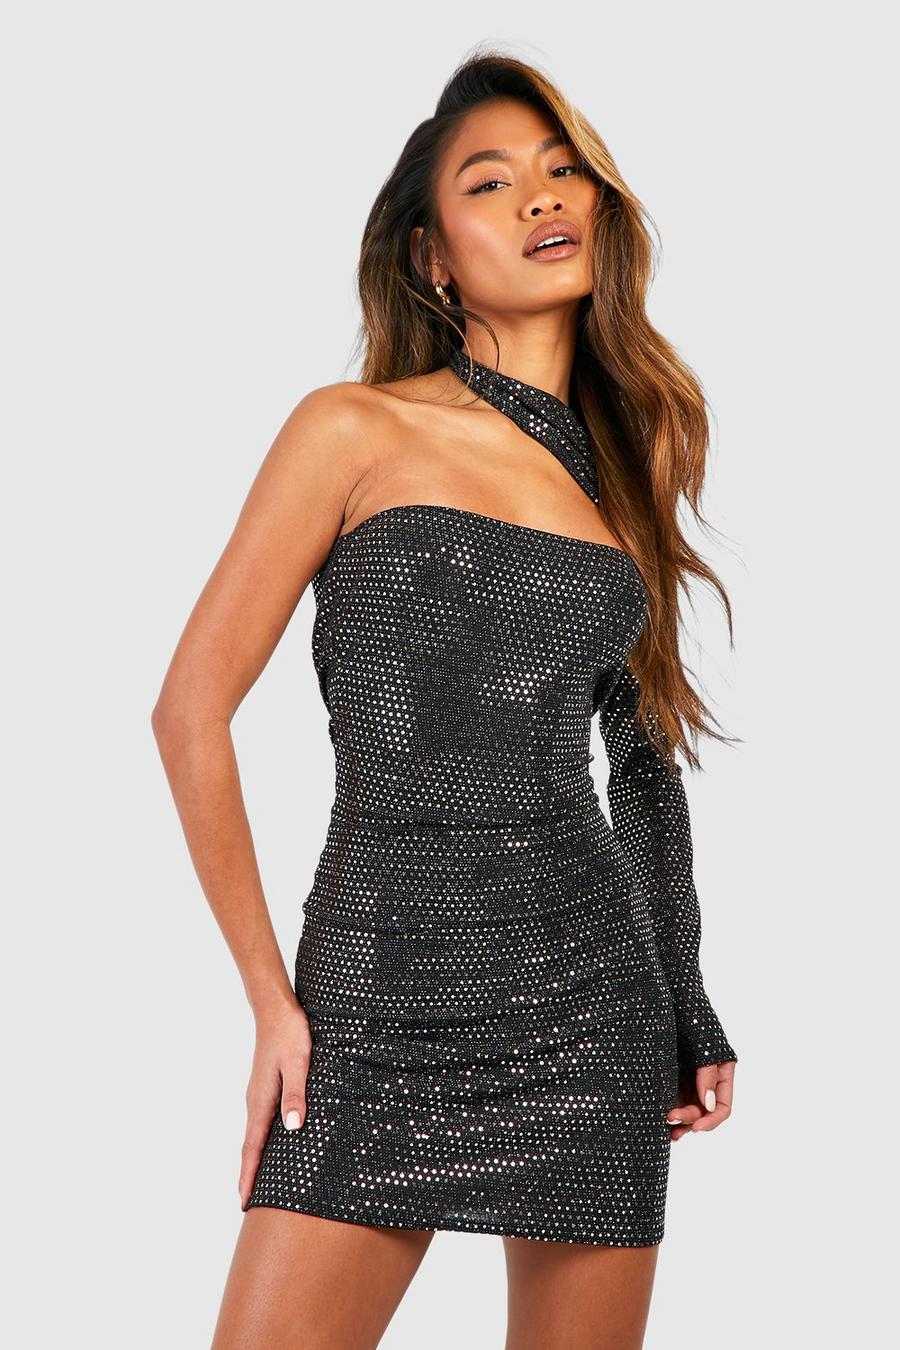 Christmas Party Dresses, Xmas Party Dress